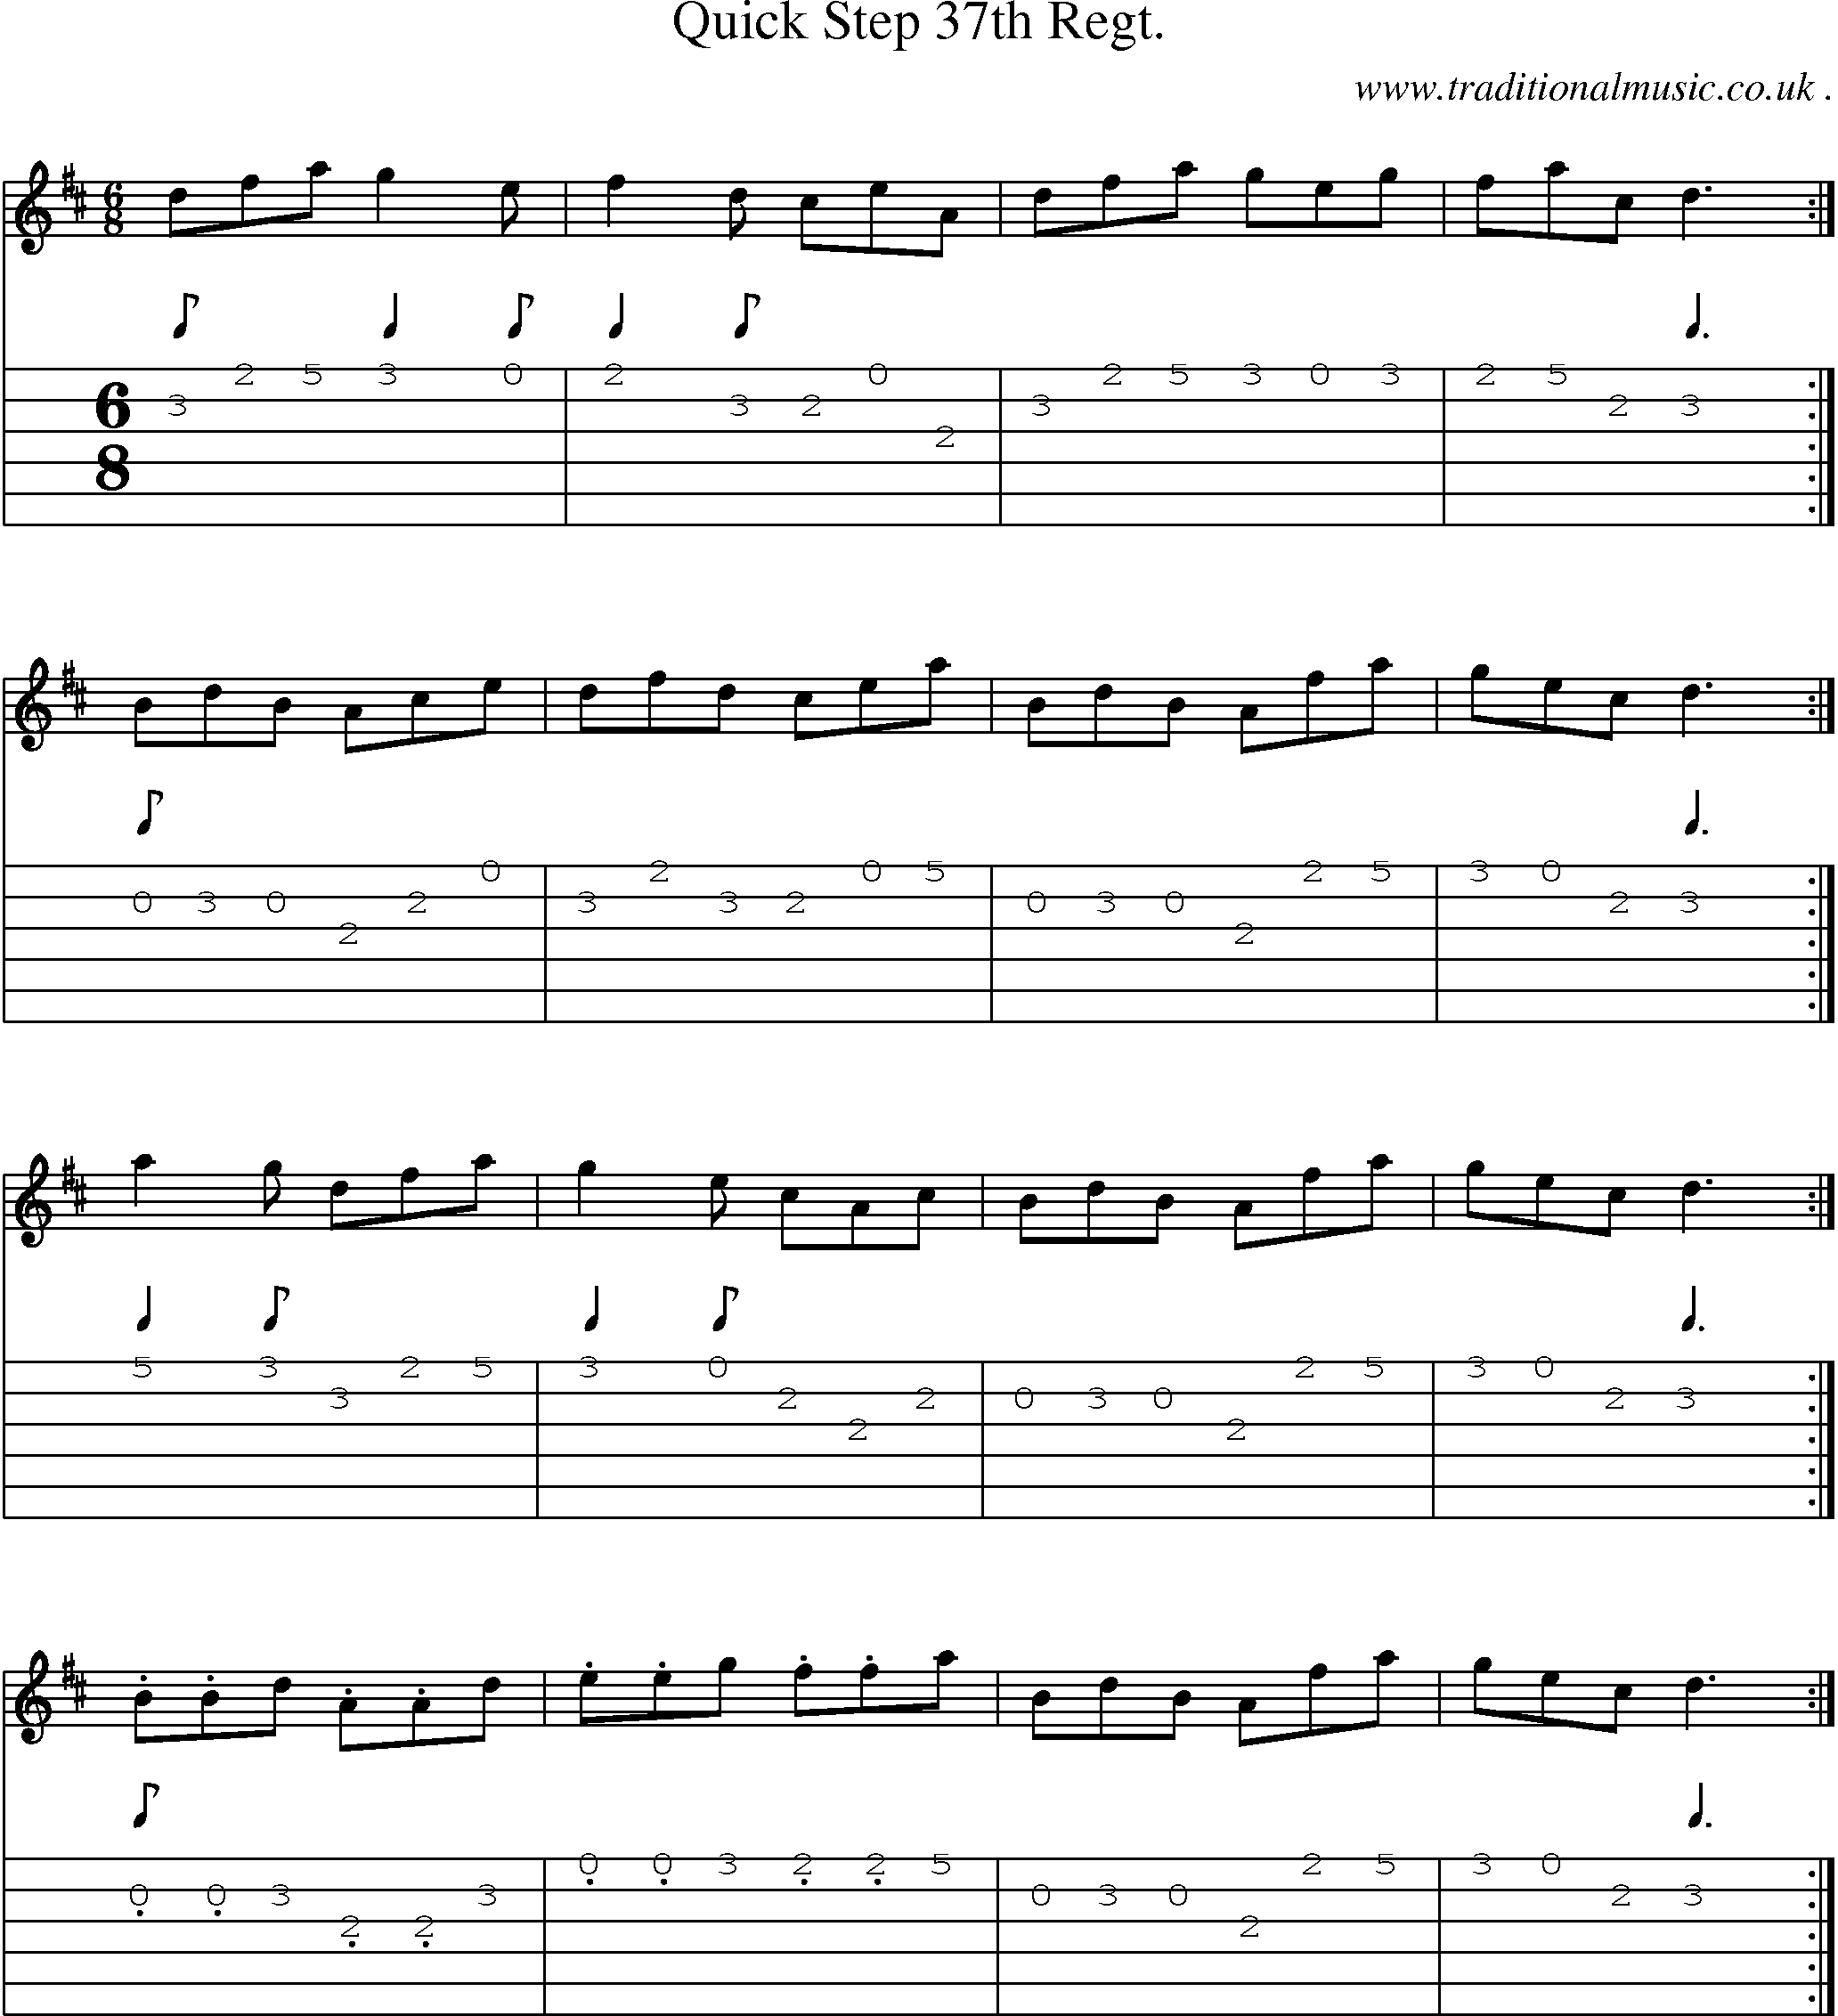 Sheet-Music and Guitar Tabs for Quick Step 37th Regt